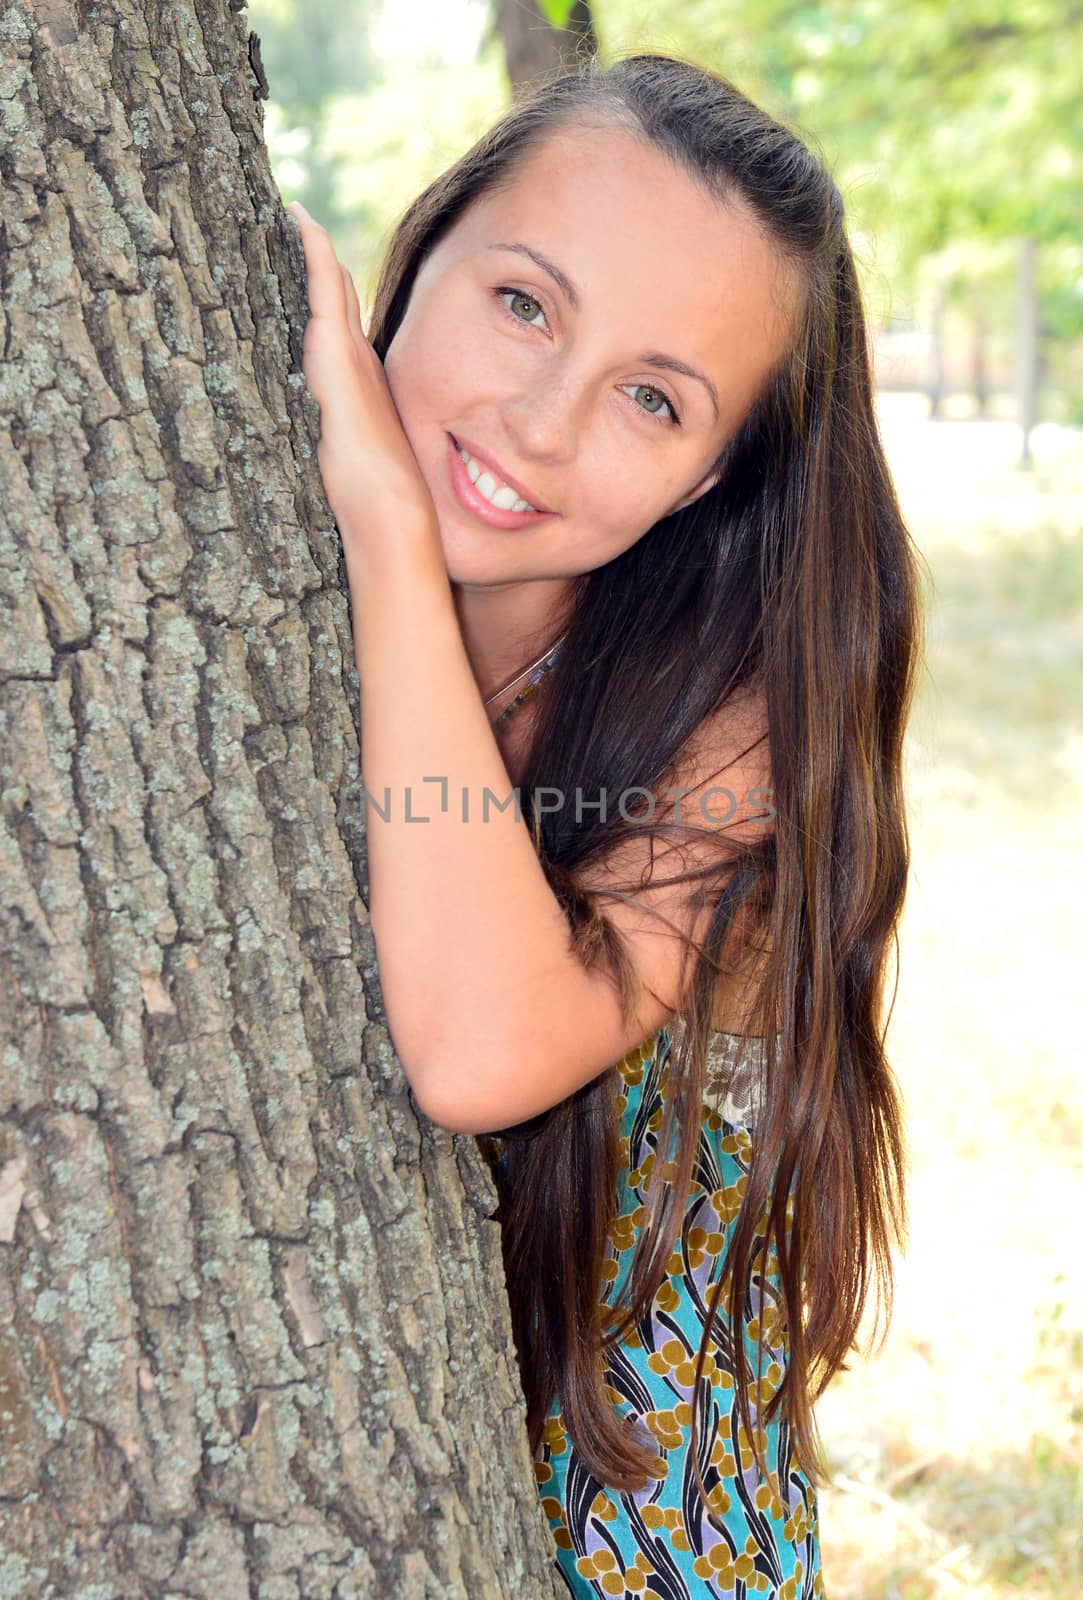 Portrait of a young girl hid behind a tree trunk